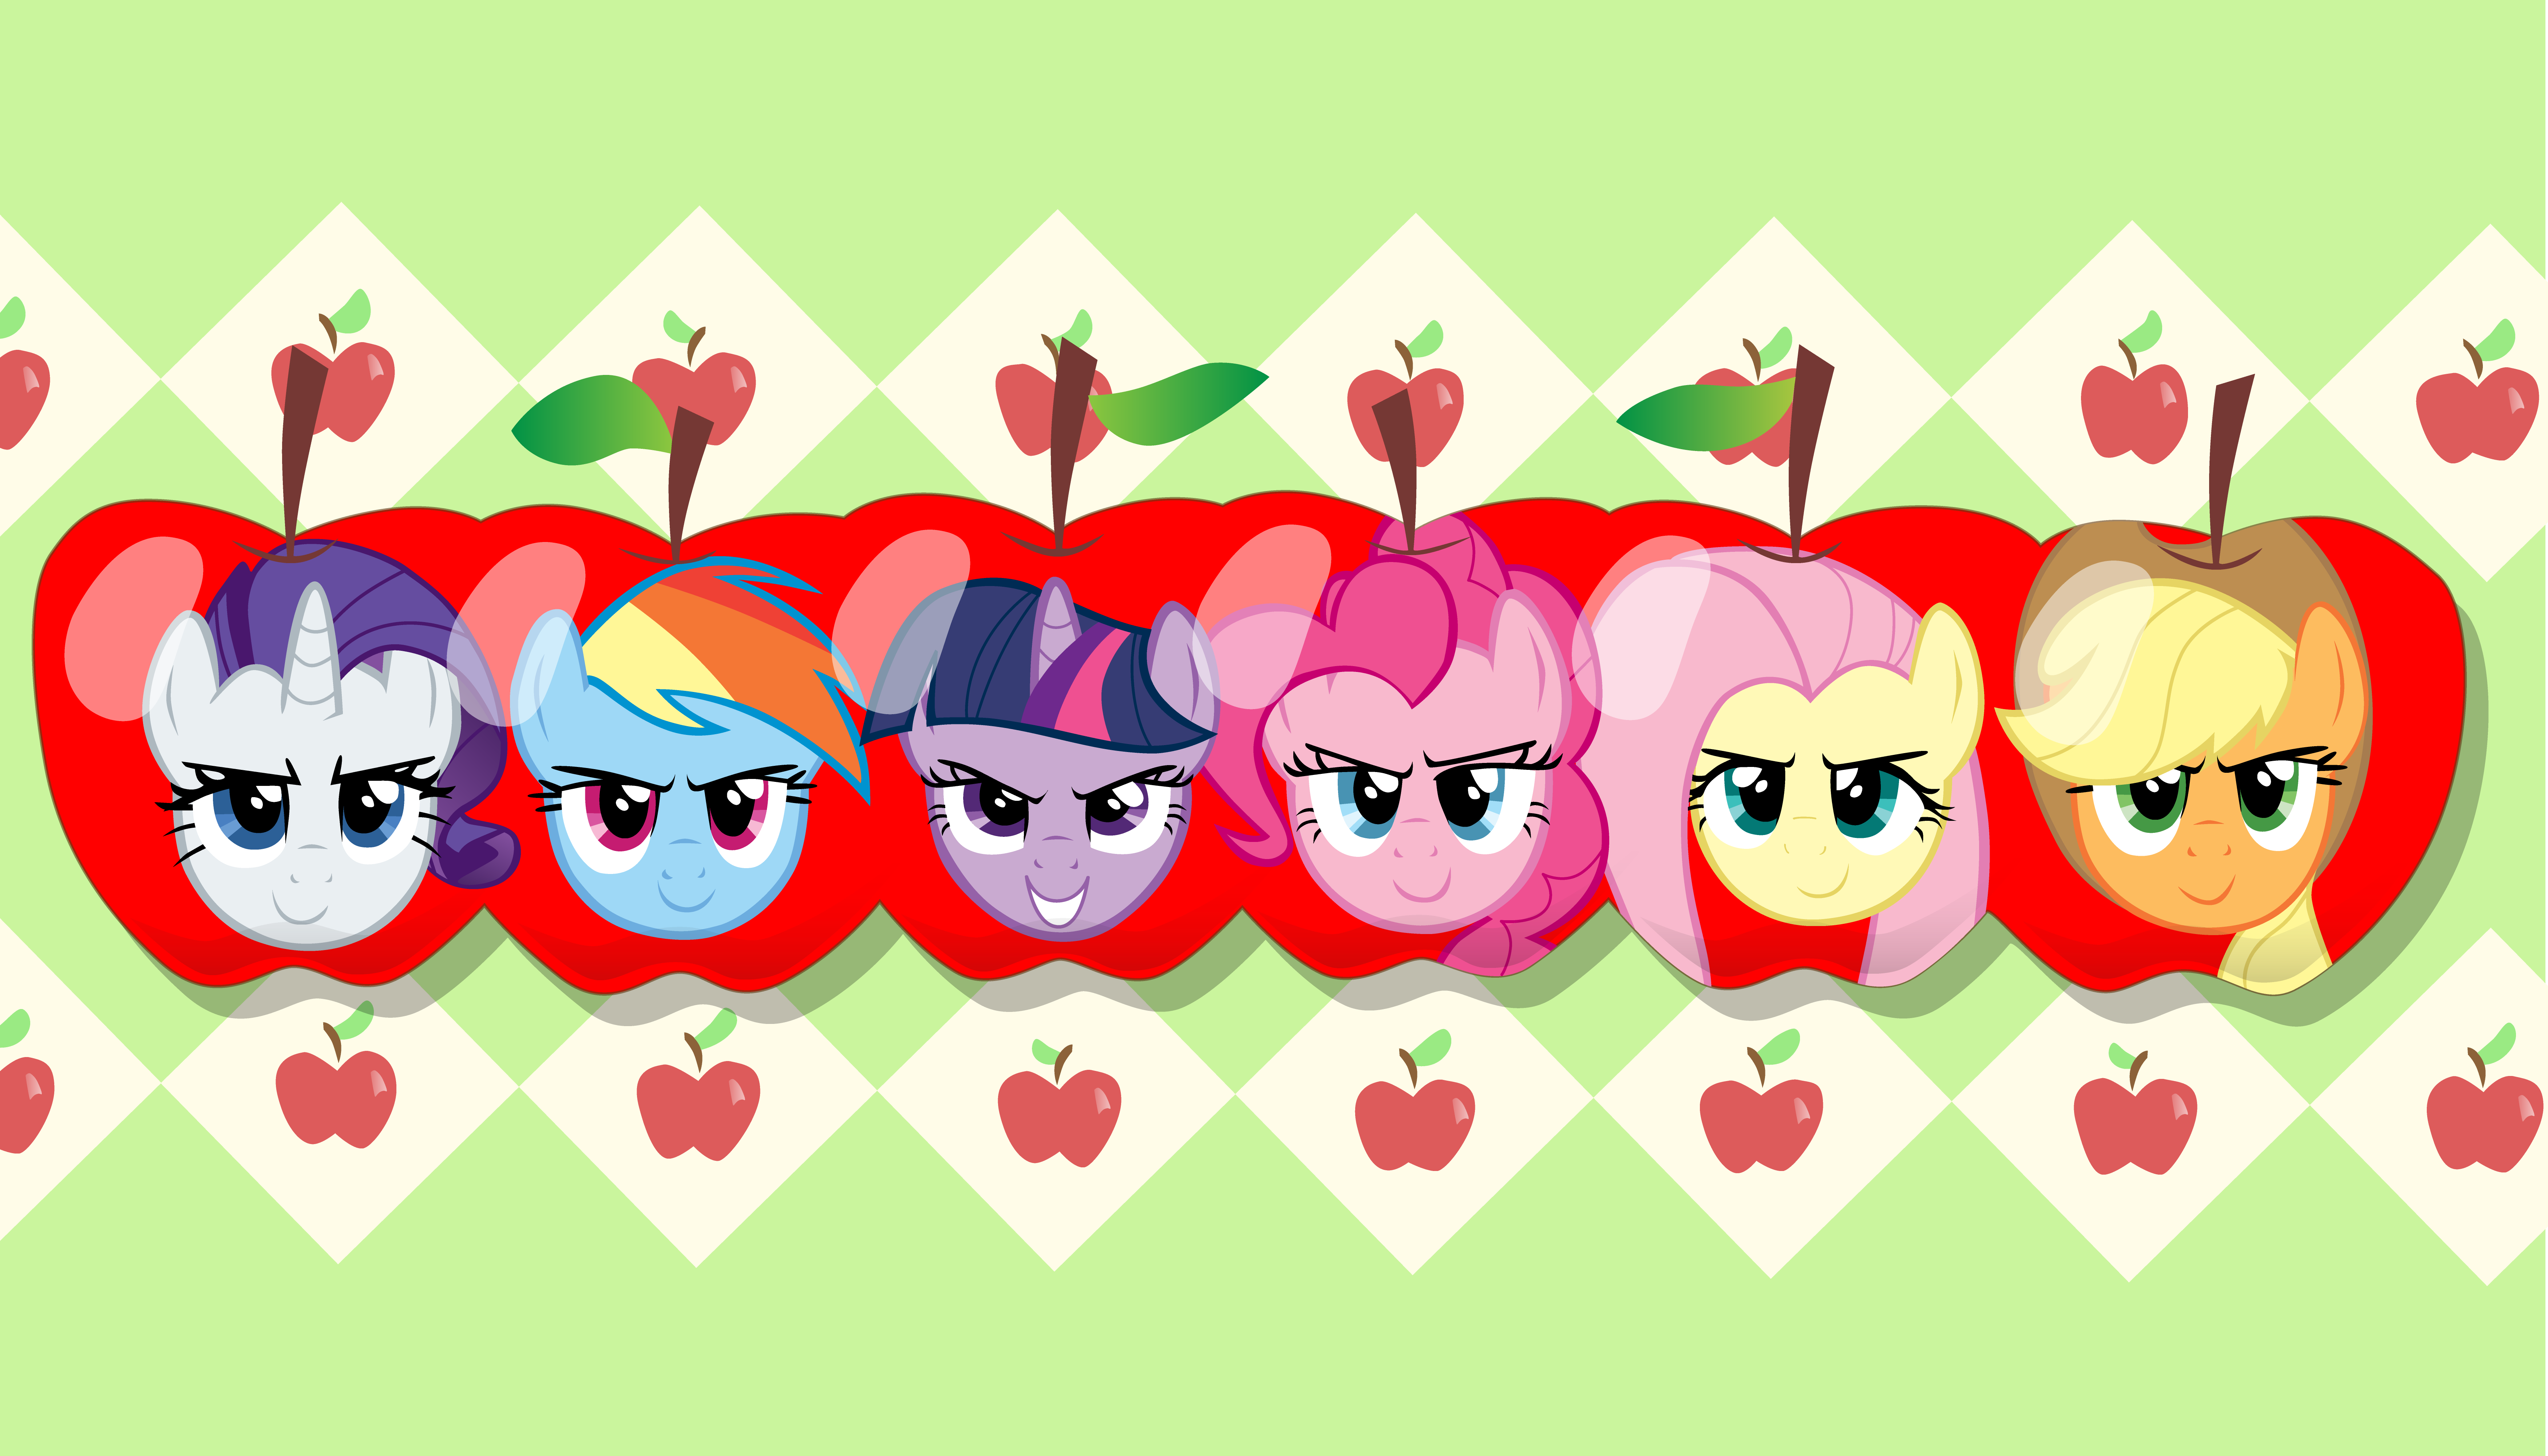 Apple Powers Activate! by PDPie